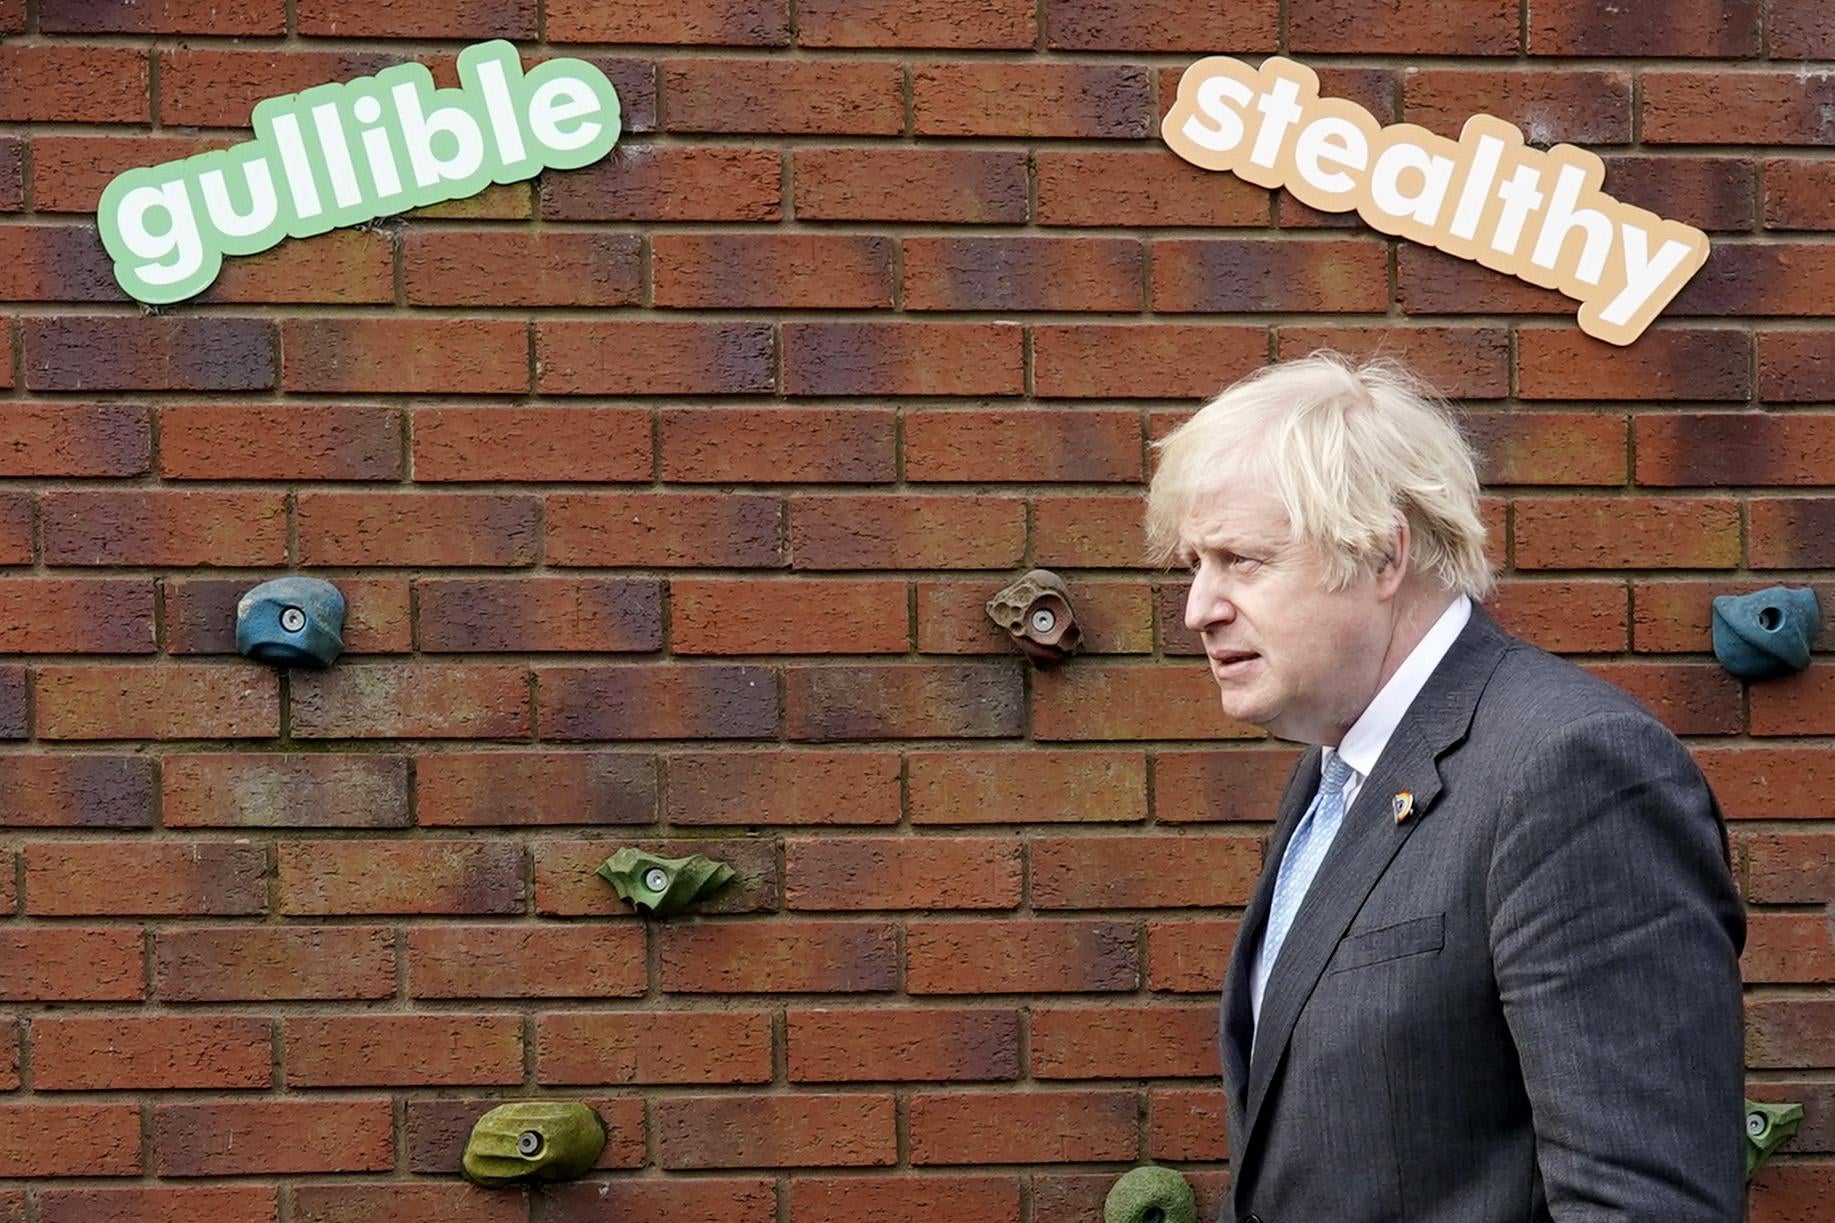 Boris Johnson stands in front of a wall at a school, with two signs reading "Gullible" and "Stealthy" above his head.